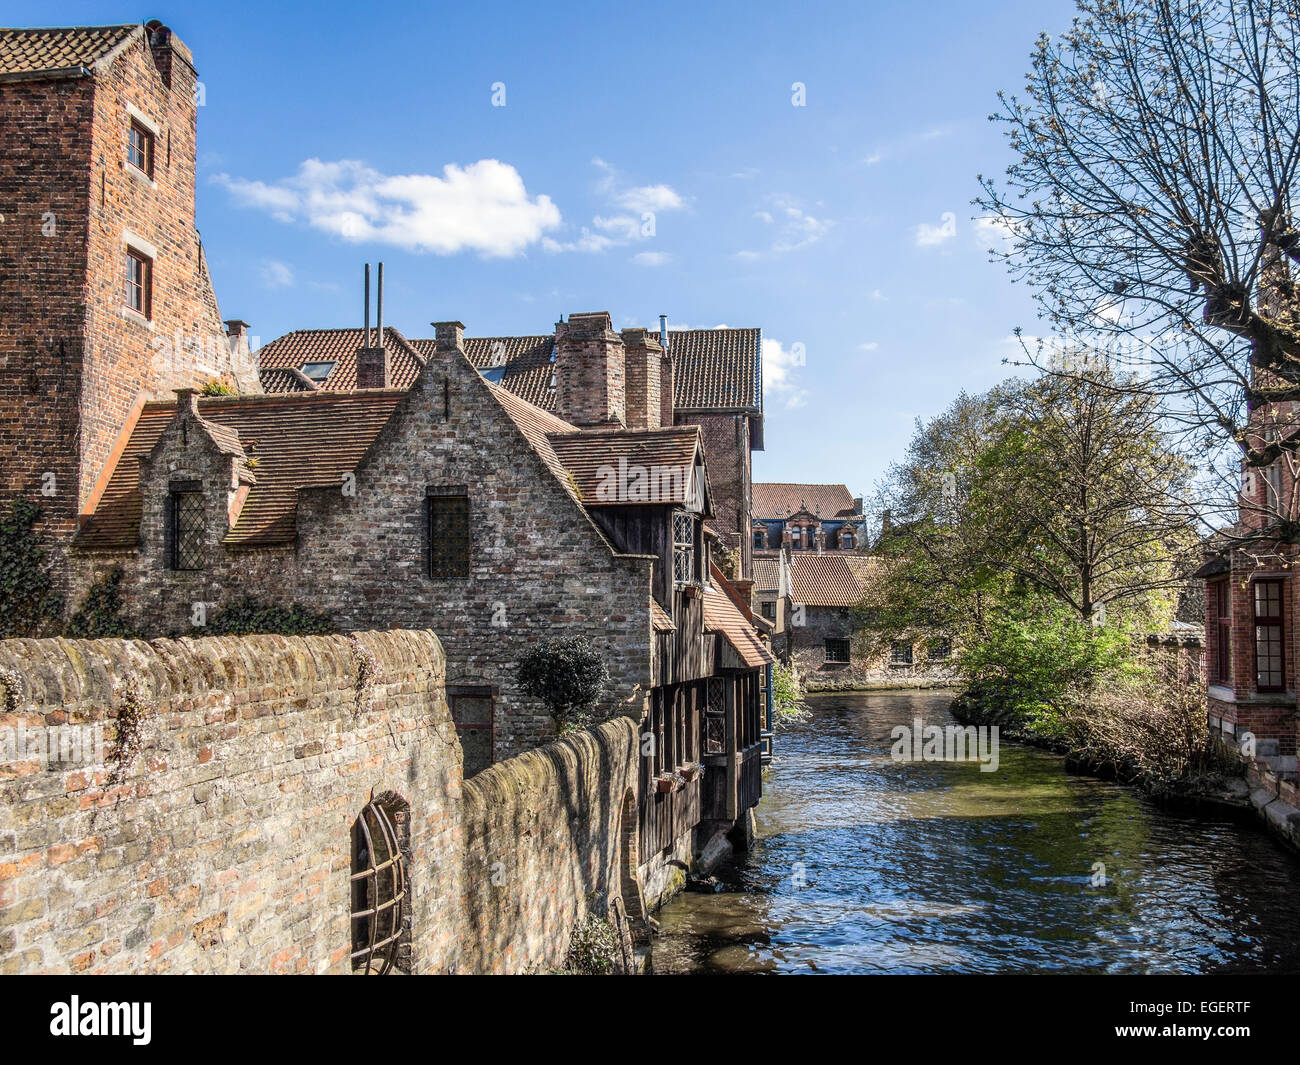 BRUGES, BELGIUM, UK - APRIL 13, 2014:  Exterior view of 17C Houses along one of the canals in the city Stock Photo